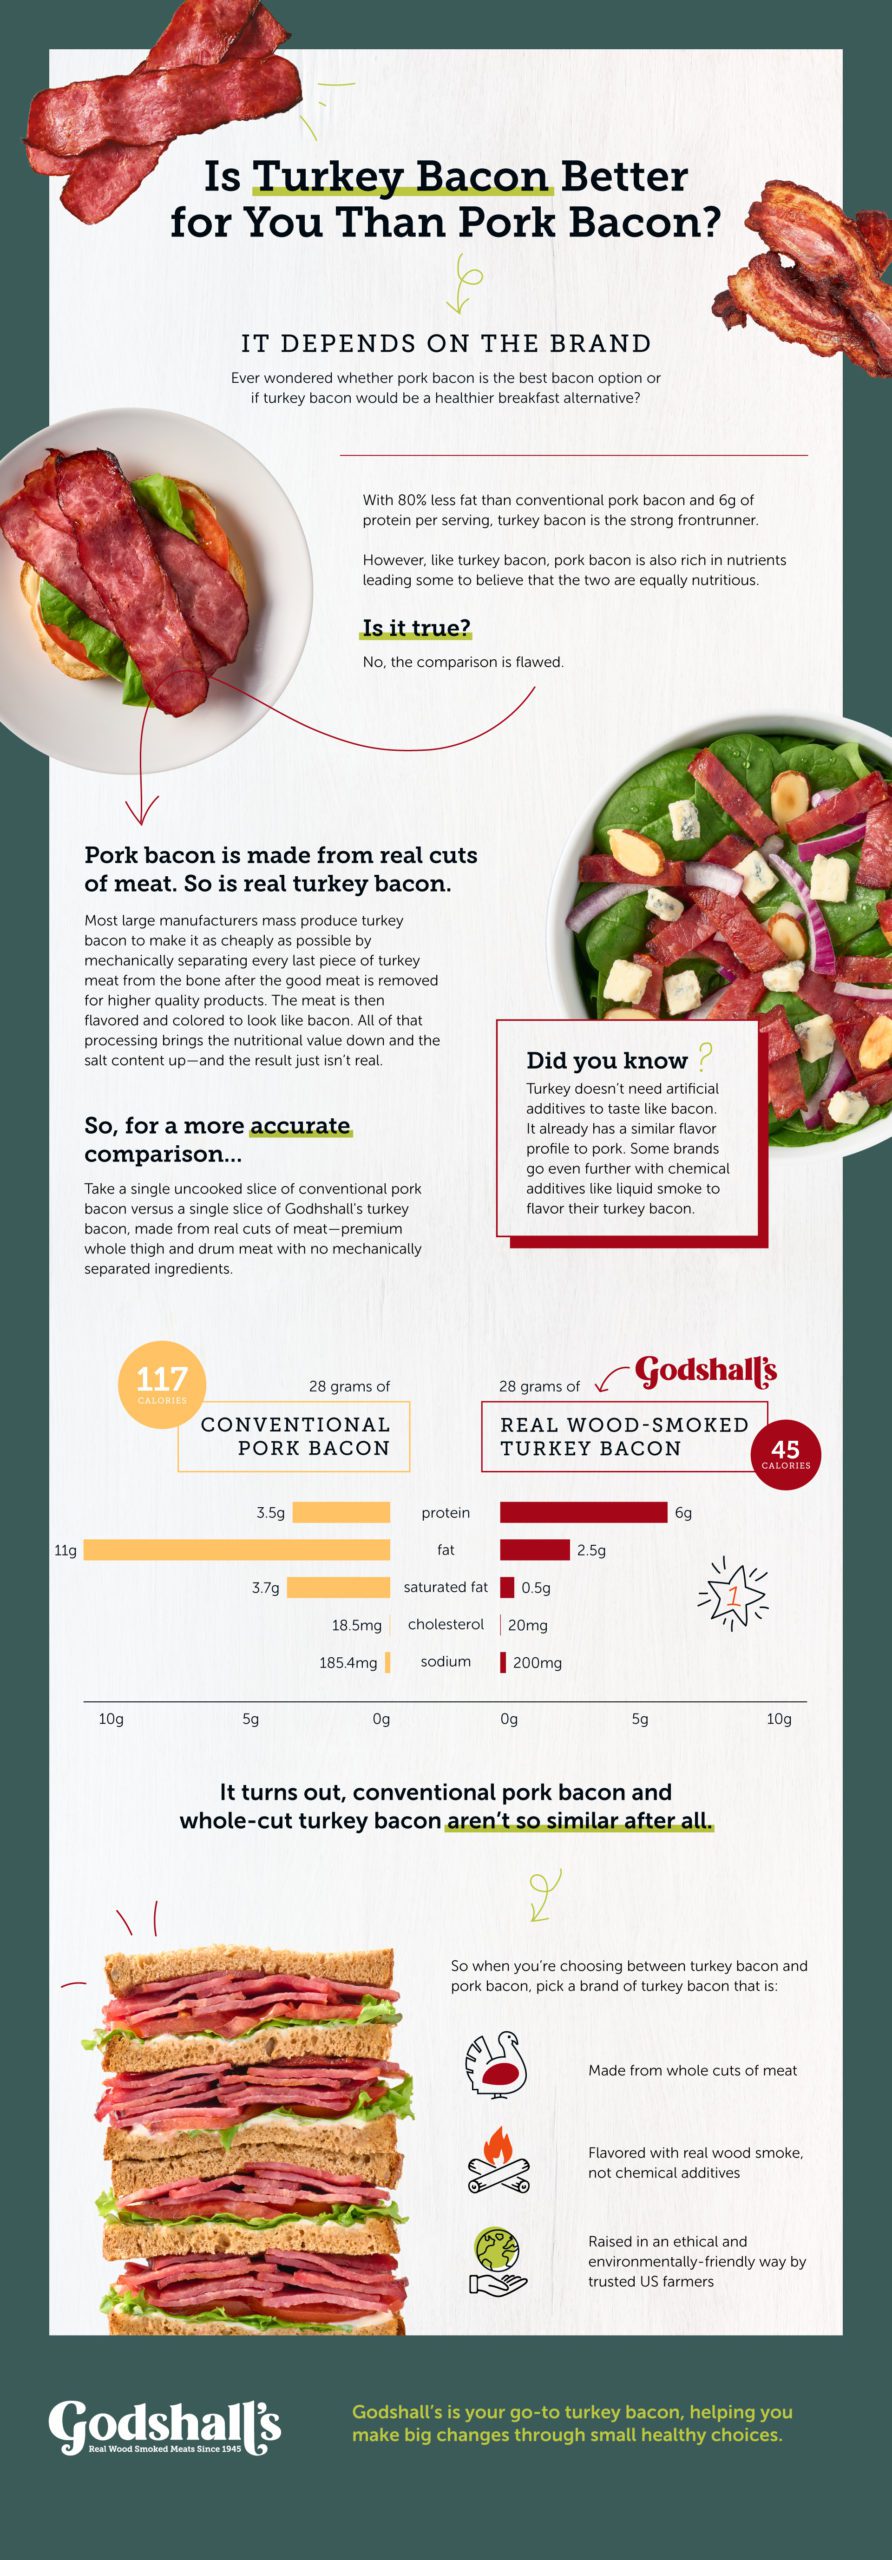 When it comes to bacon, you’ve got options. There’s conventional bacon, made from pork, and then there’s turkey bacon. Our infographic compares the nutritional value, including calories, protein, and fat, of your options.